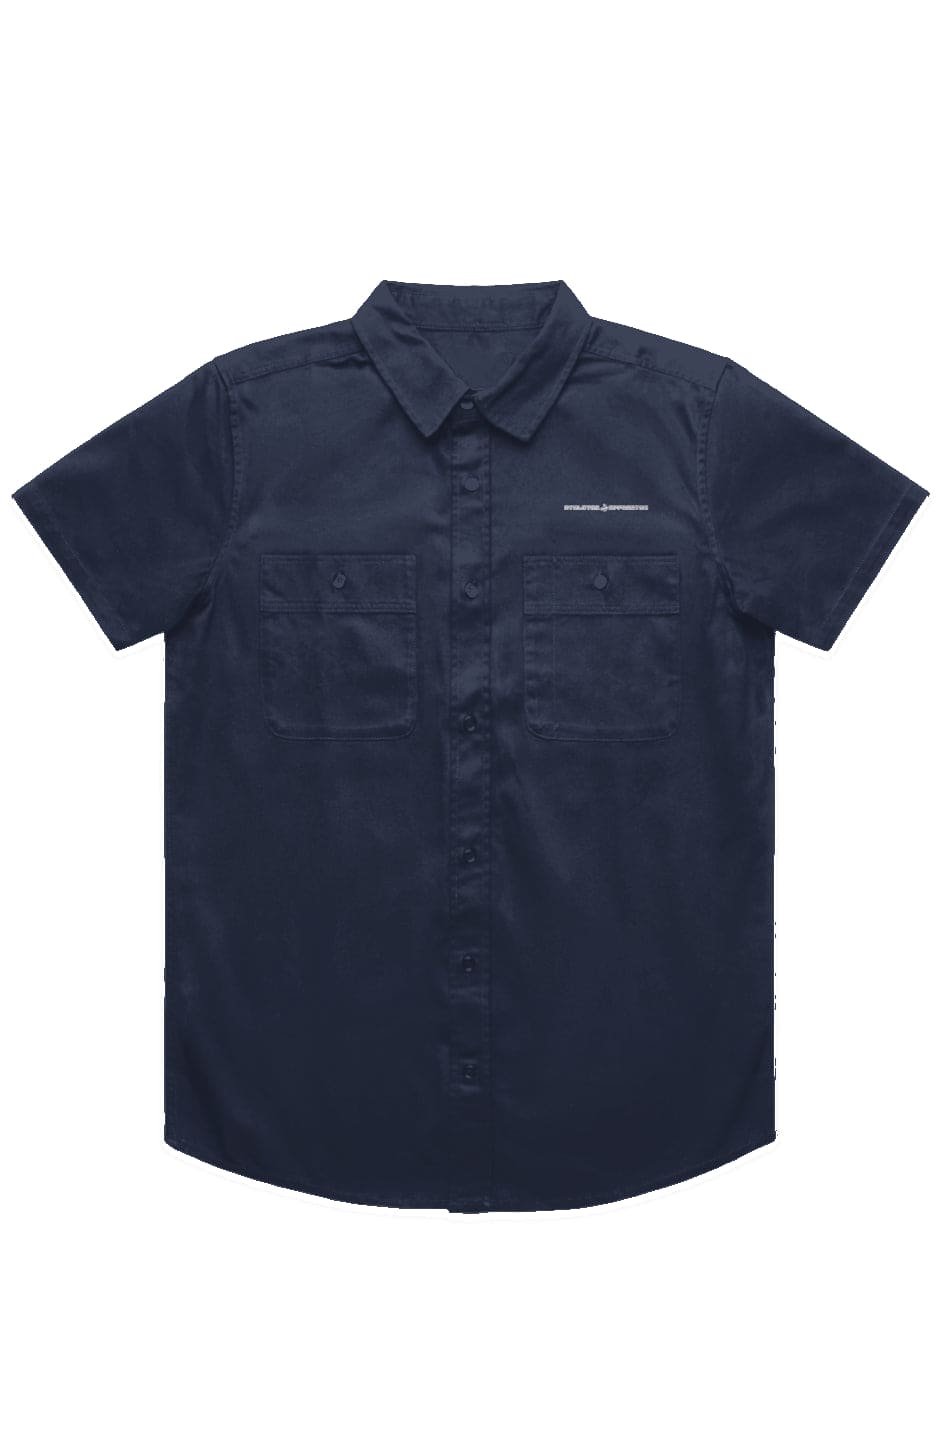 Athletic Apparatus Blue workwear s/s shirt